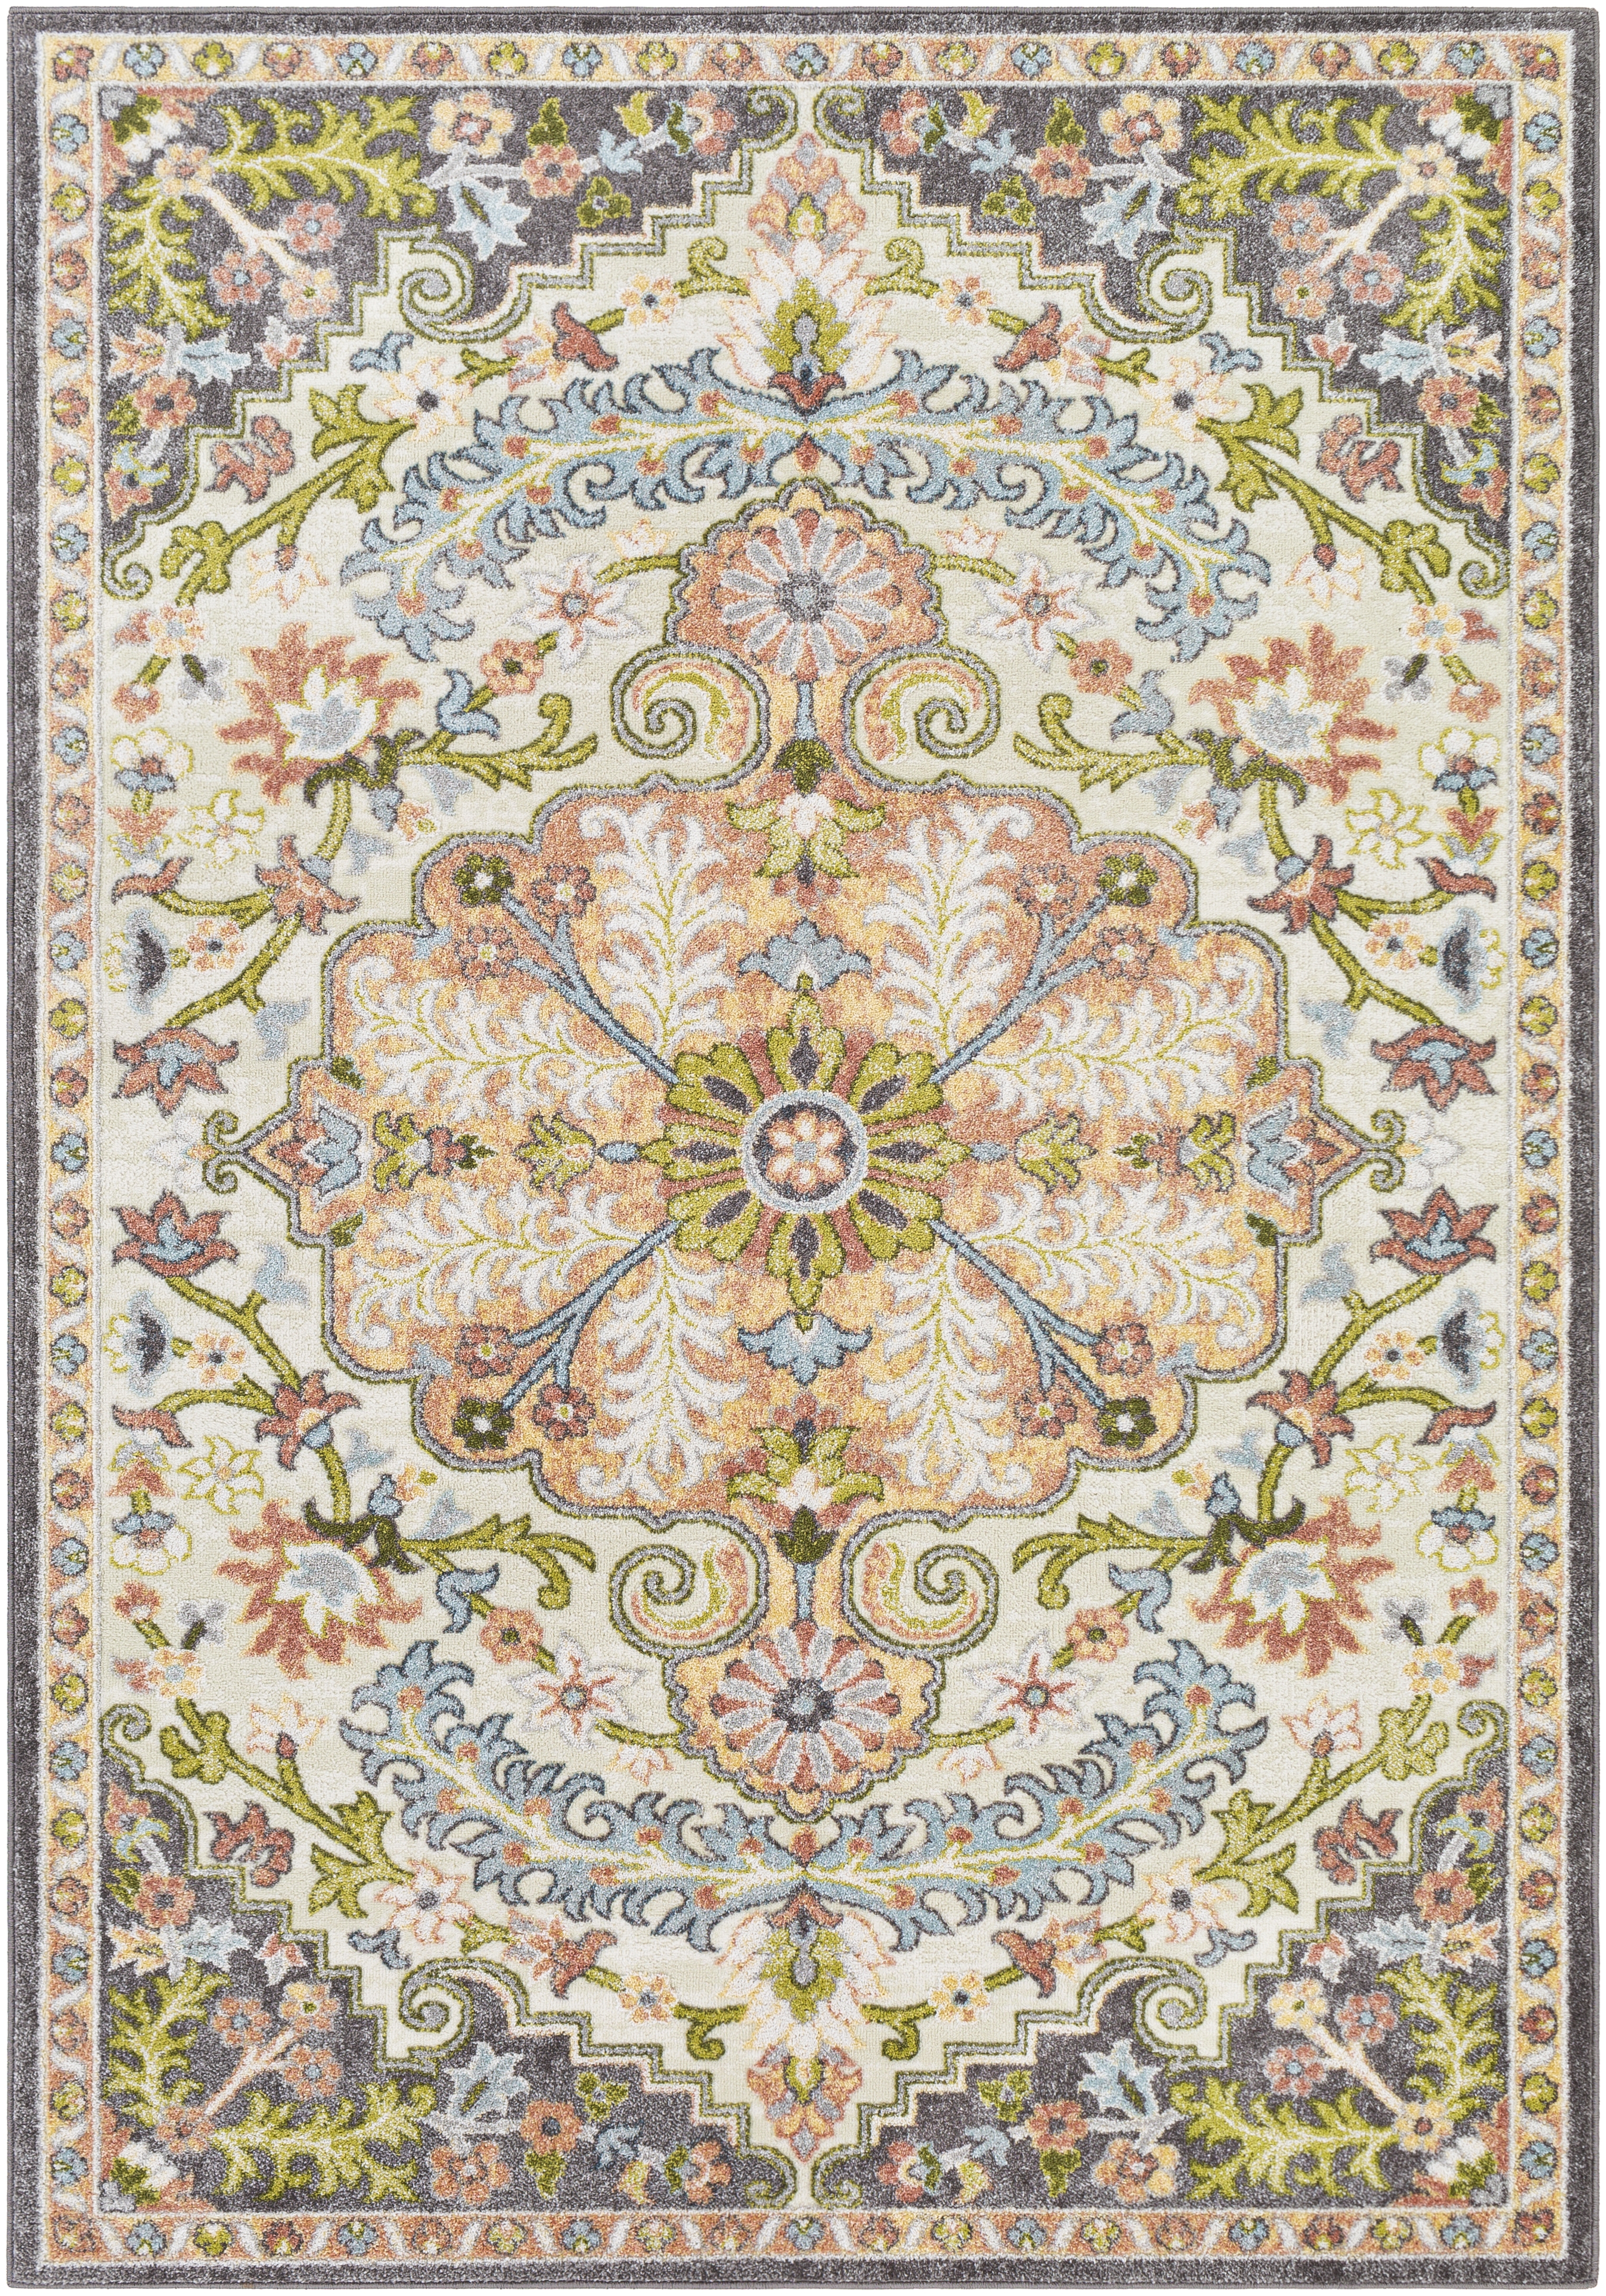 New Mexico Rug, 2' x 2'11" - Image 0